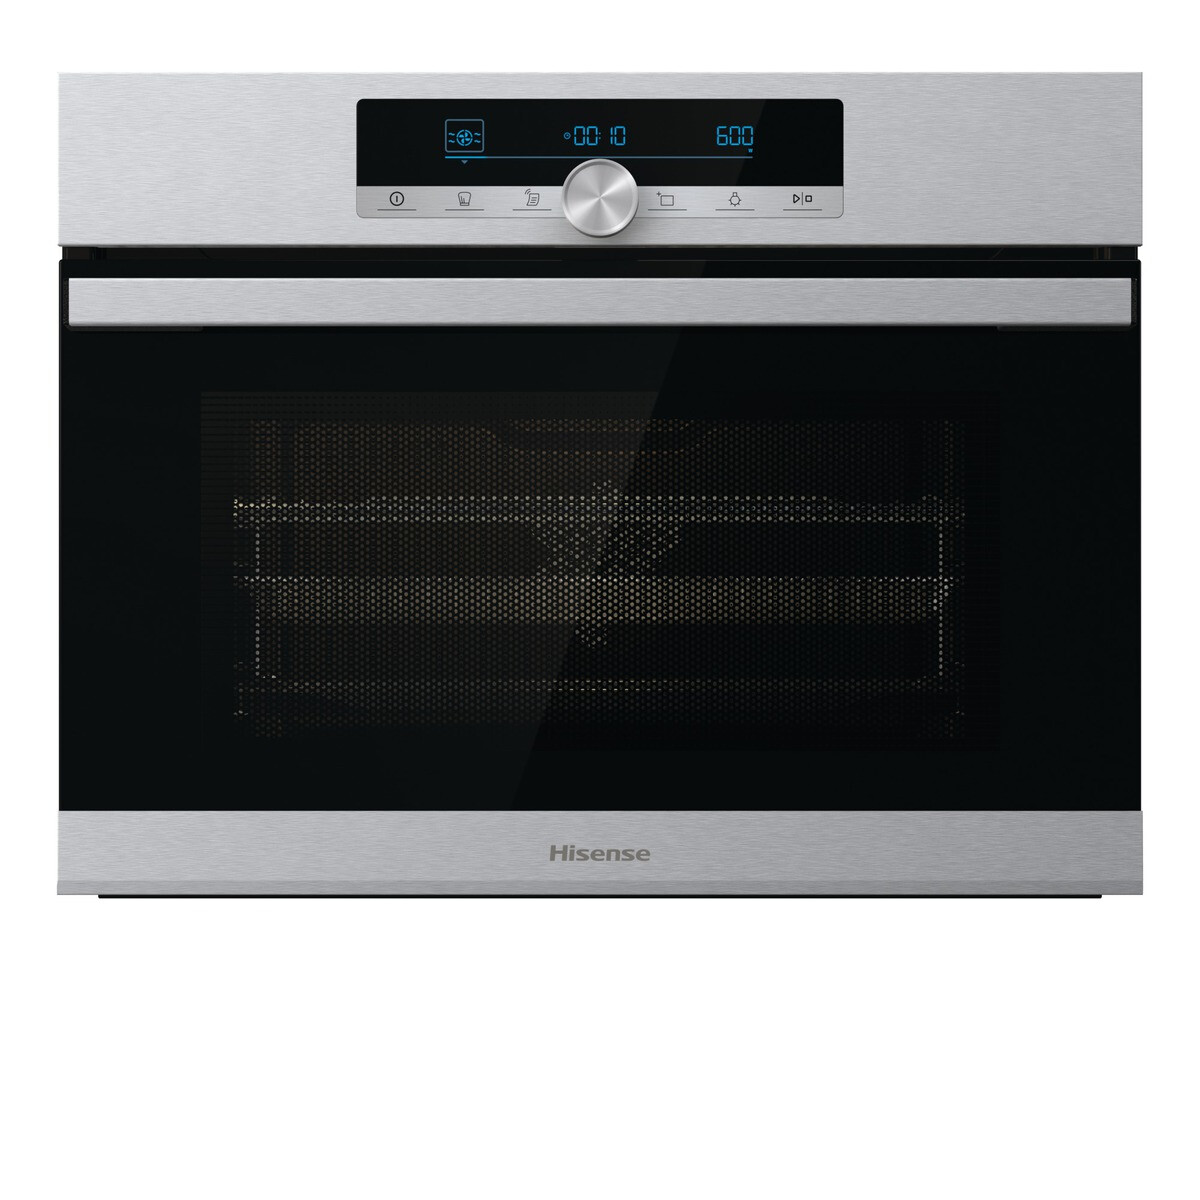 Hisense BIM44321AX Built In Compact Electric Single Oven with Microwave Function – Stainless Steel #364285